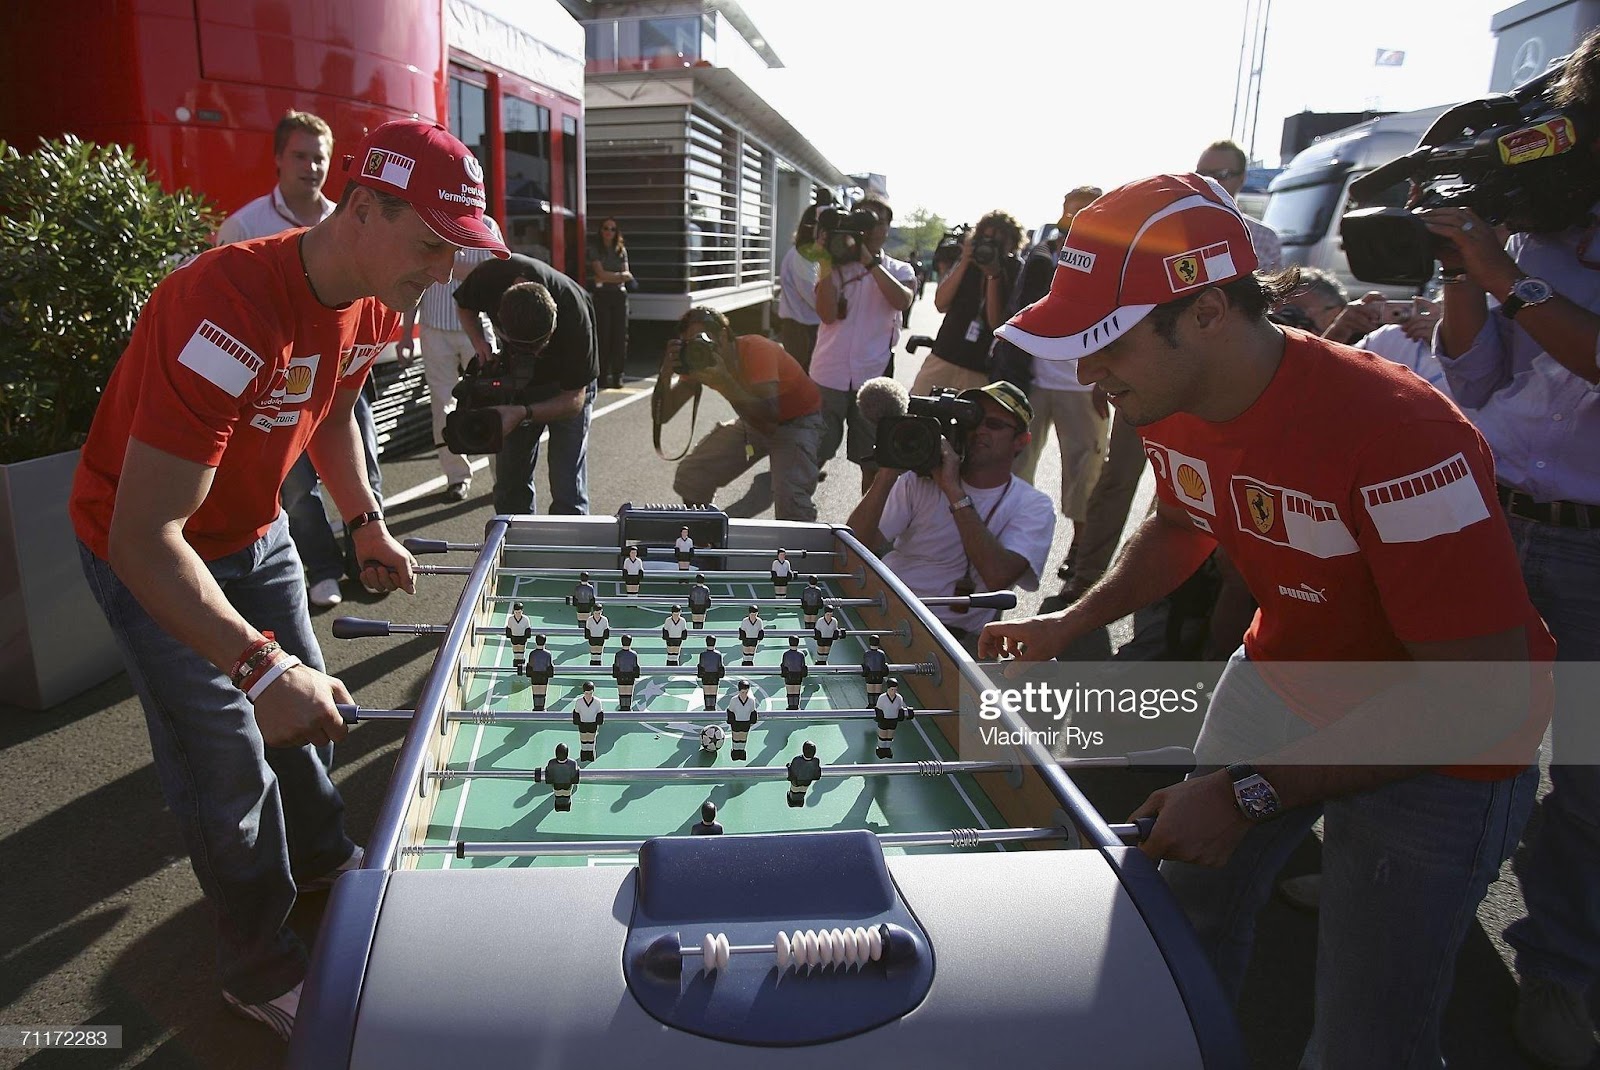 Michael Schumacher (left) and his Ferrari team mate Felipe Massa play a table football in the paddock after the qualifying for the F1 British Grand Prix at Silverstone on June 10, 2006.